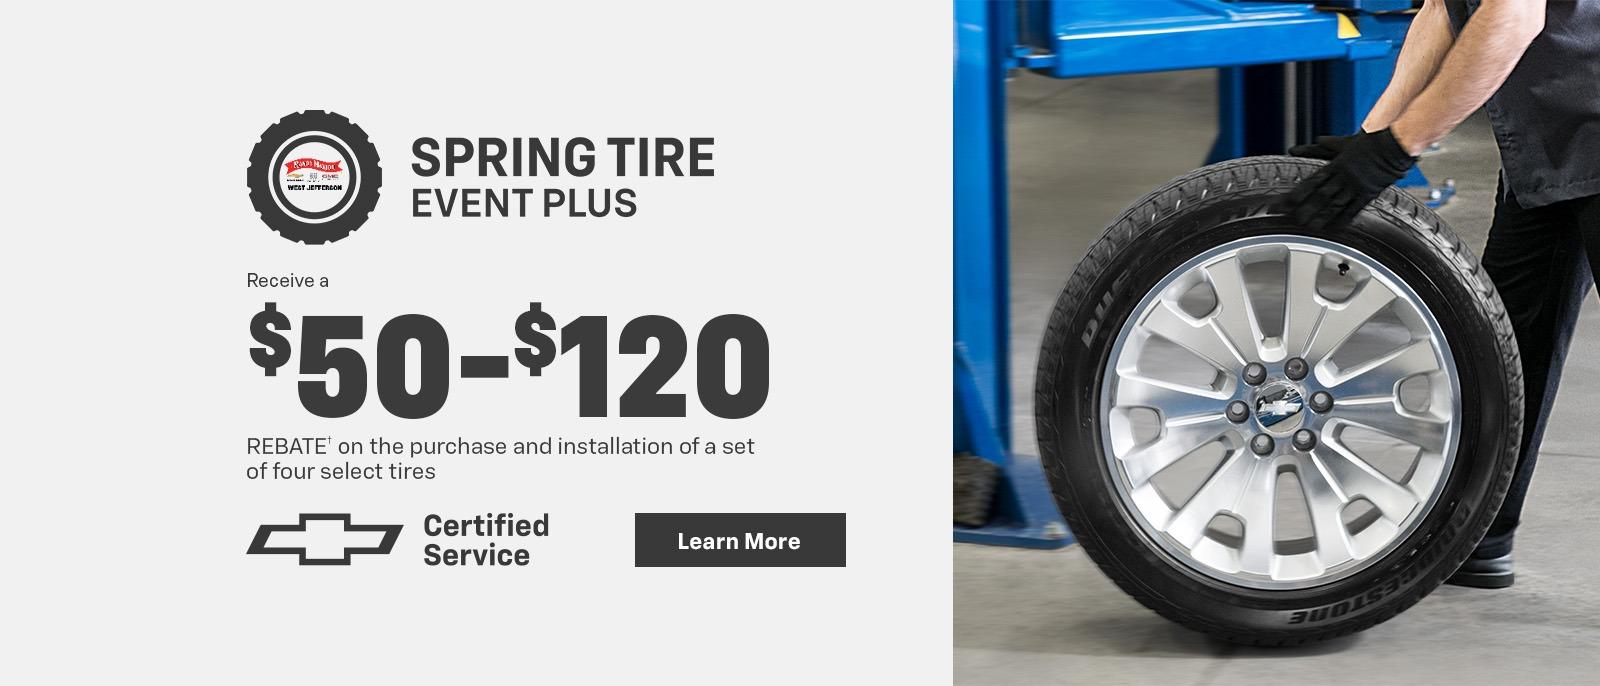 Get a Rebate on the purchase and installation of a set of four select tires.